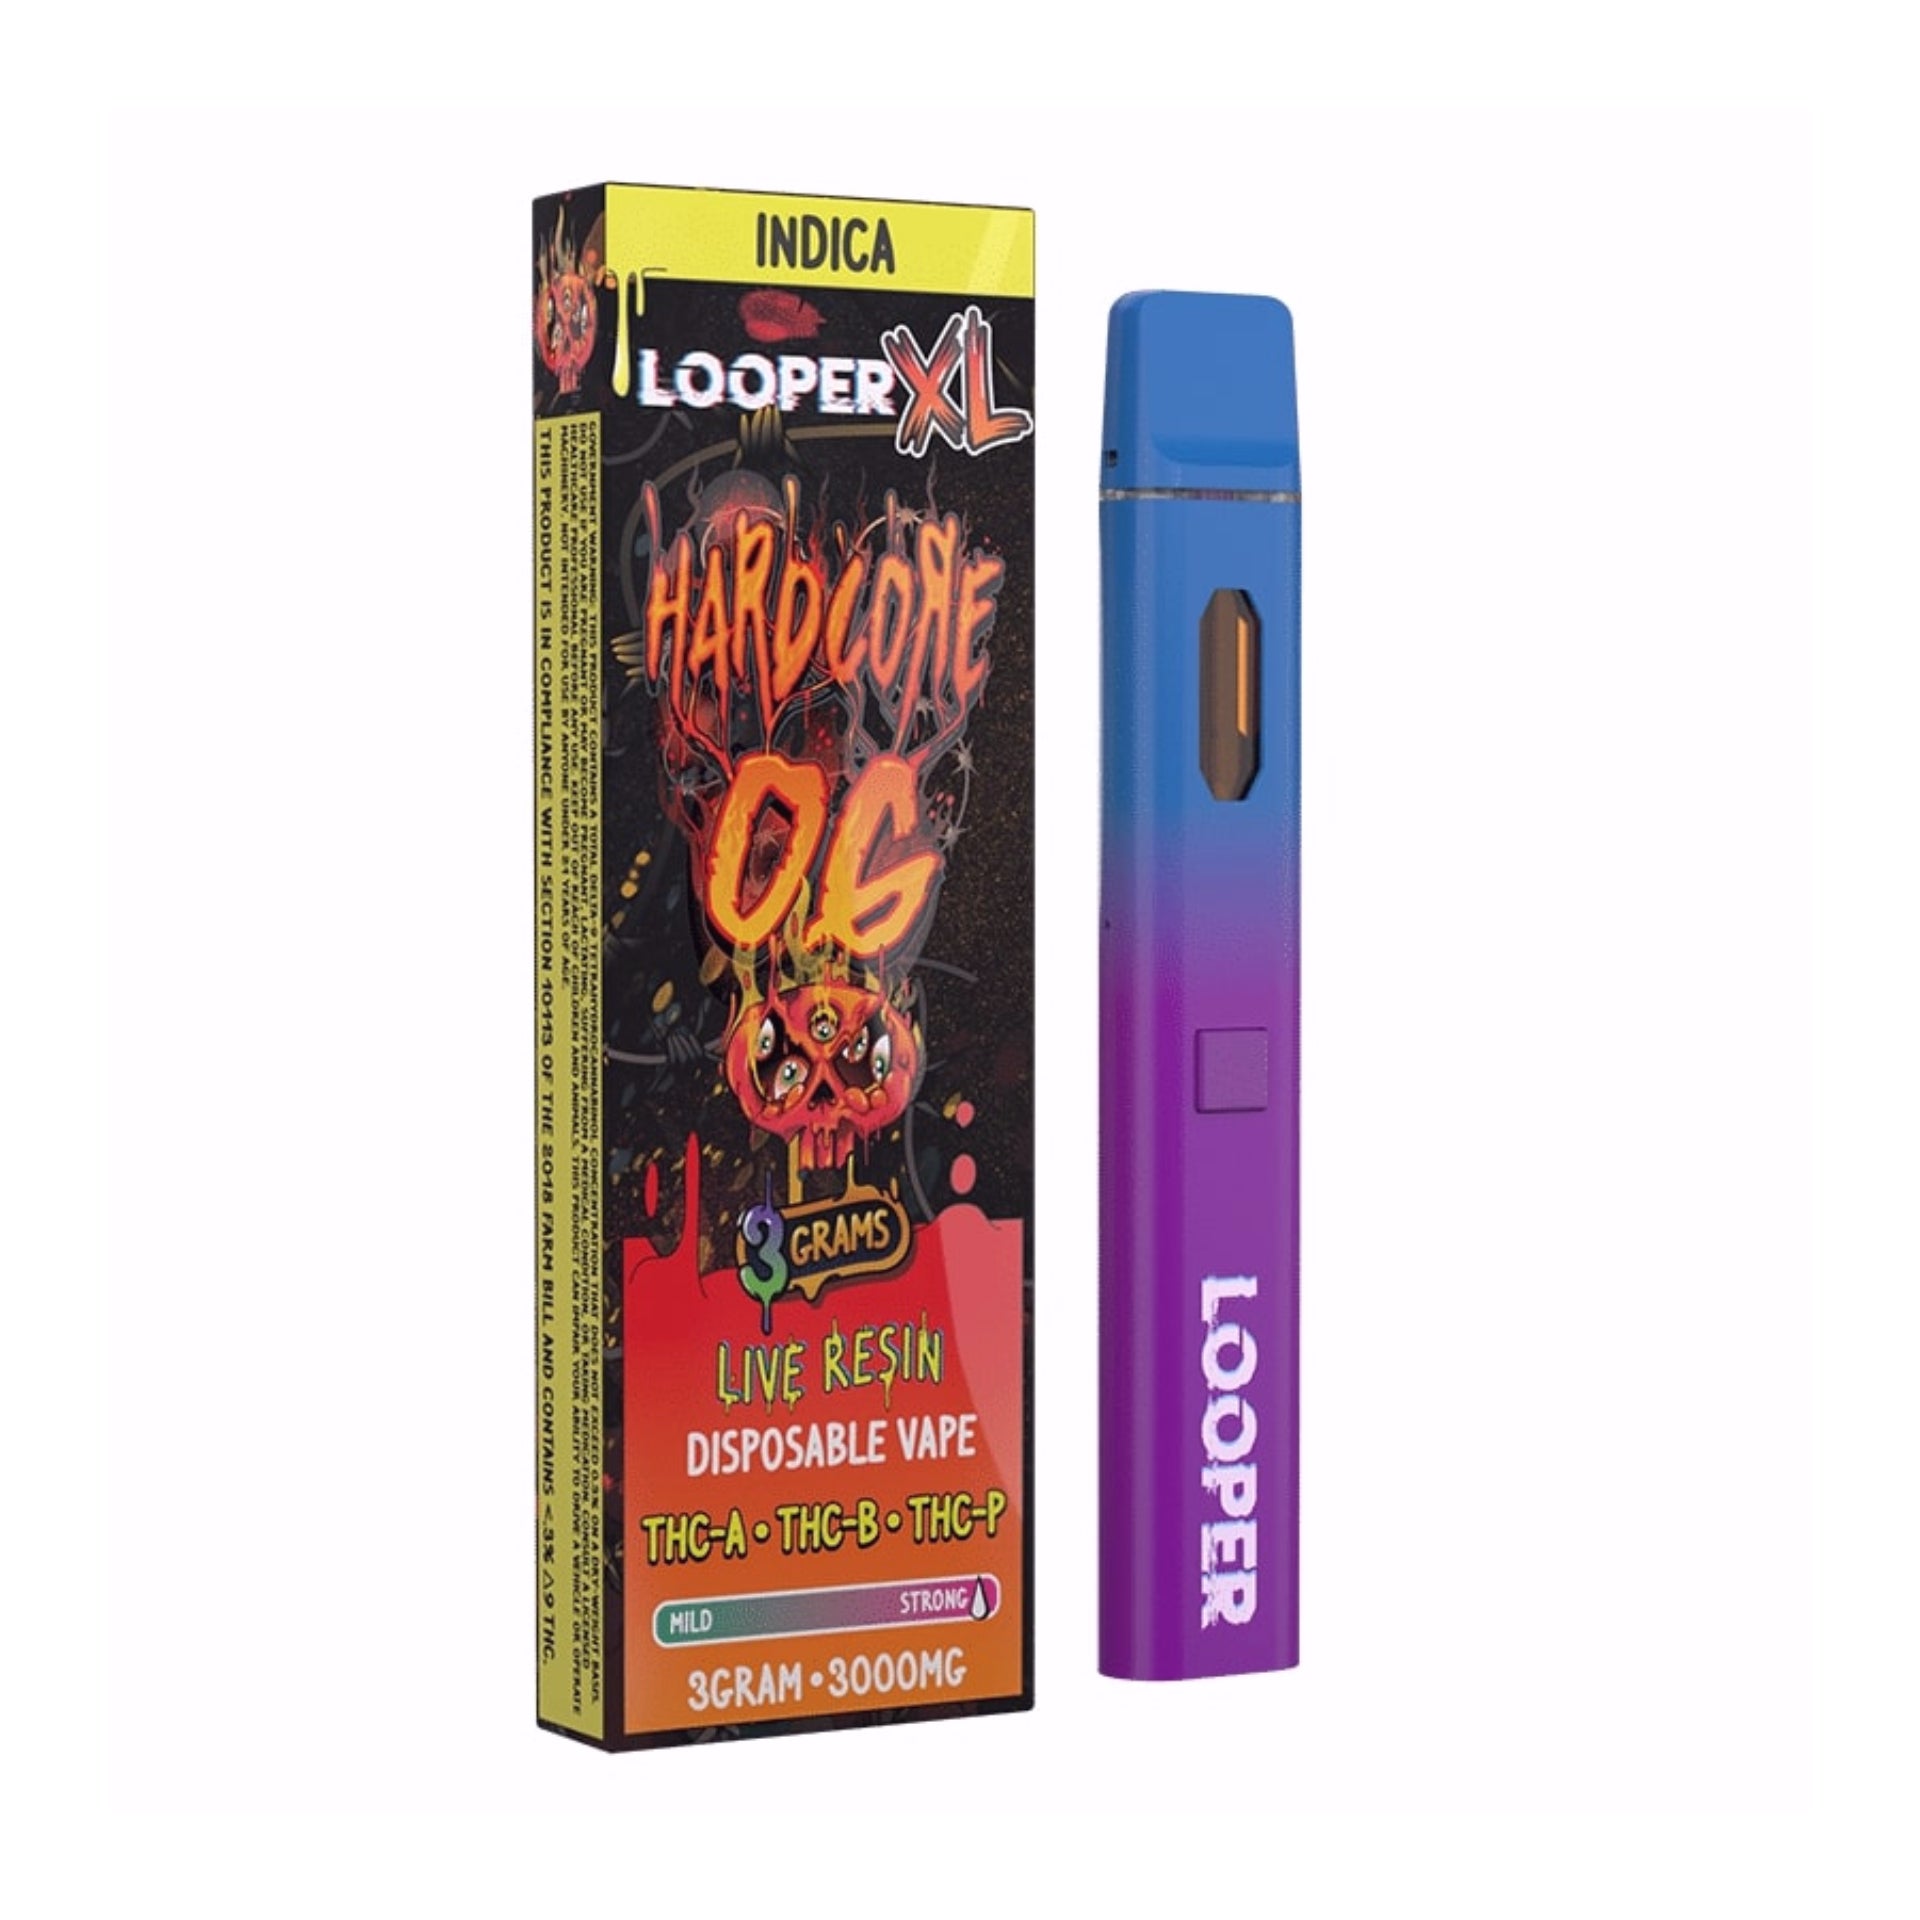 Looper XL Series Live Resin 3ML Disposables #hot – Sky High West Chester